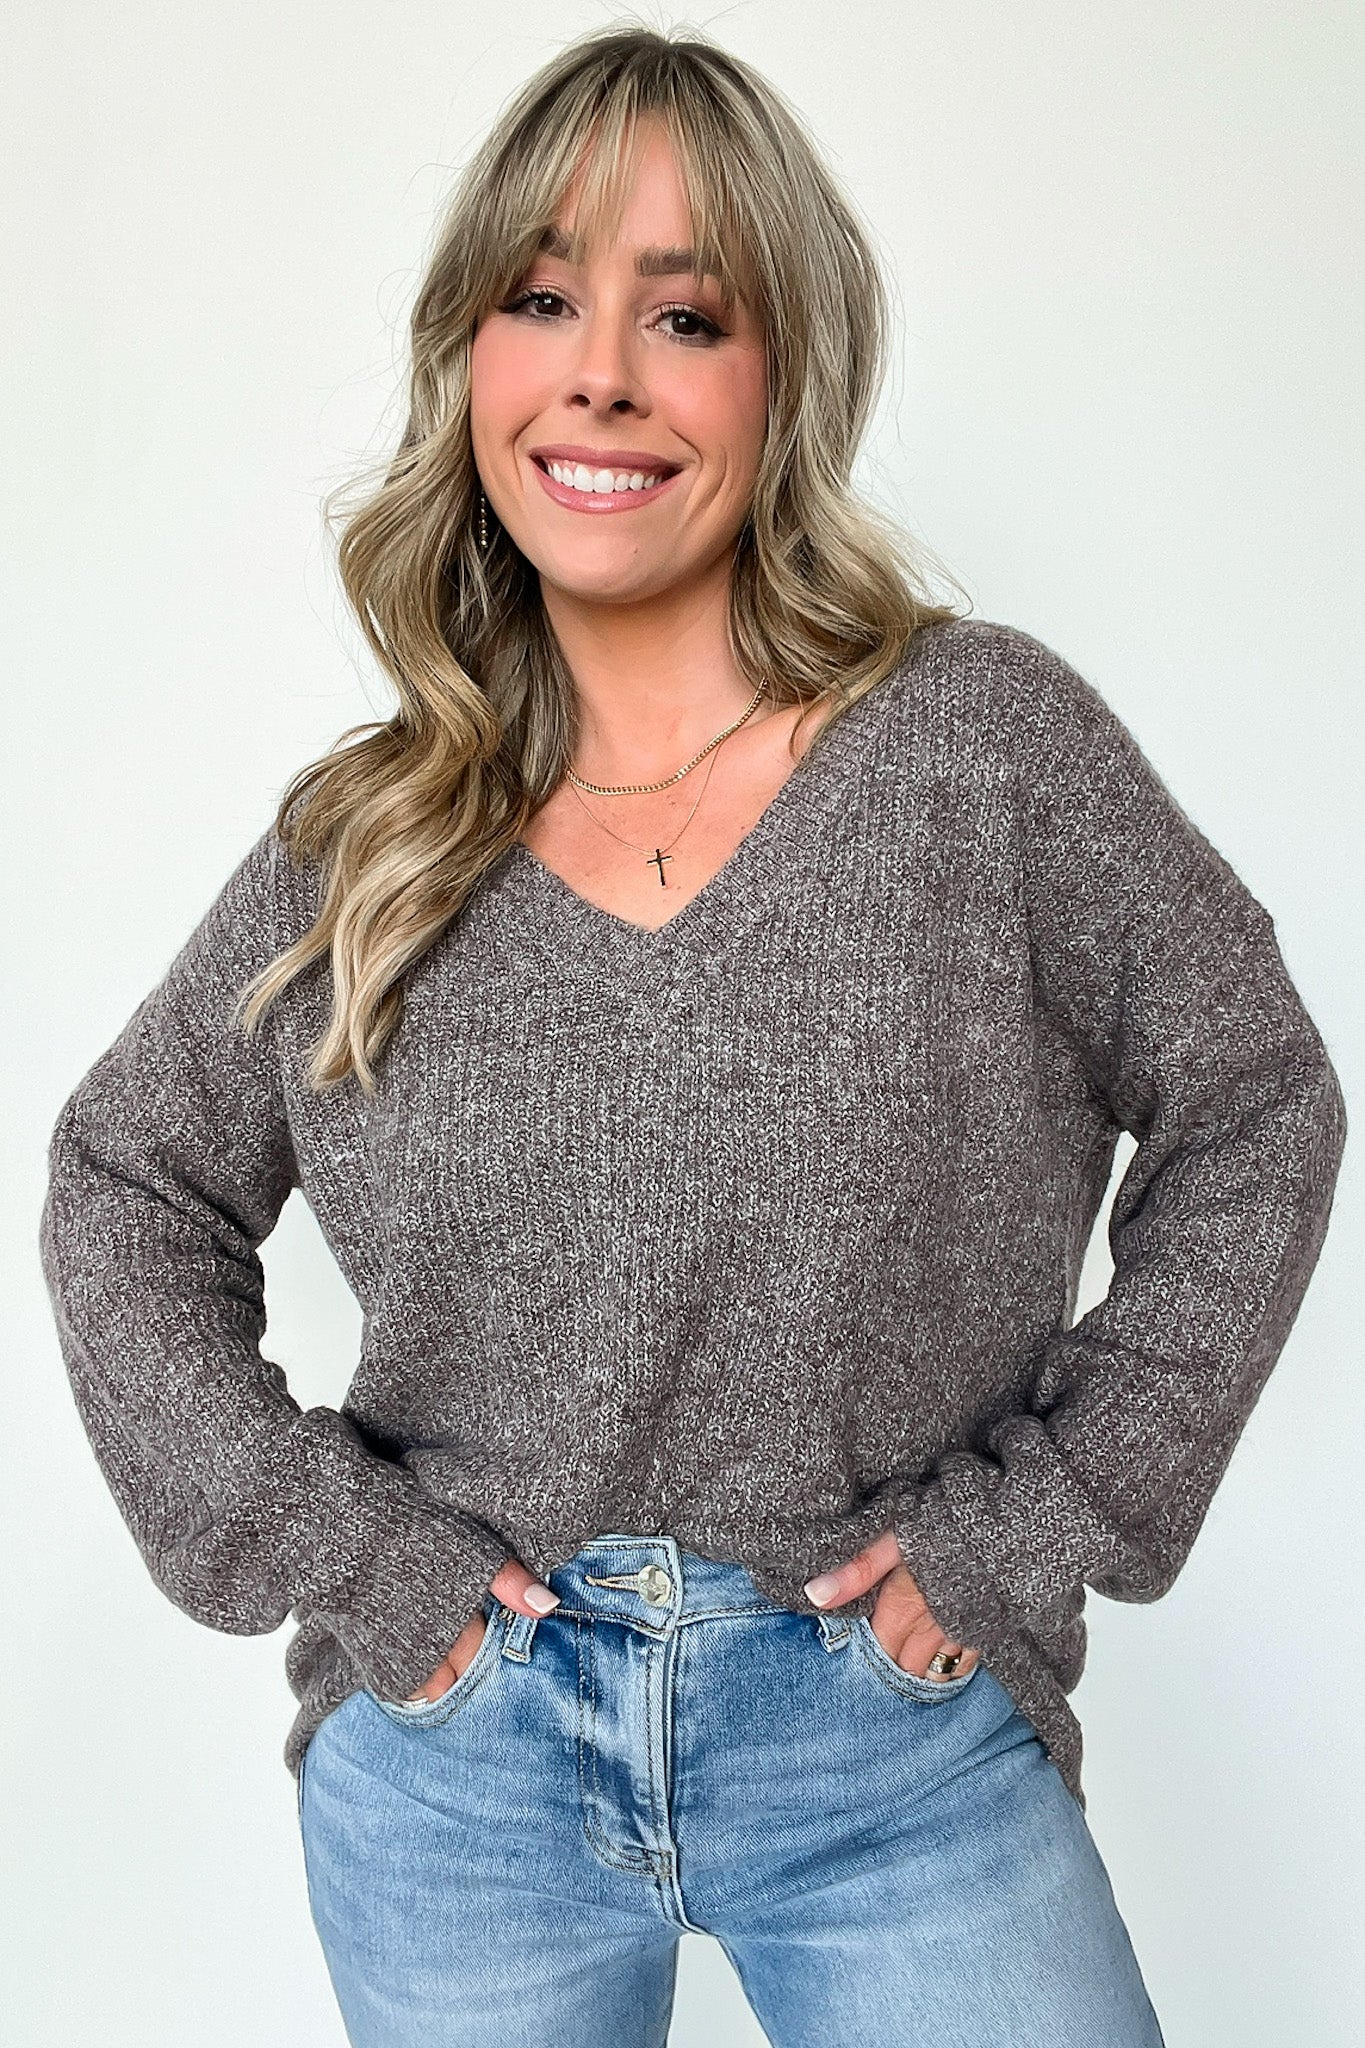  Tiannah V-Neck Ribbed Soft Knit Sweater - FINAL SALE - Madison and Mallory